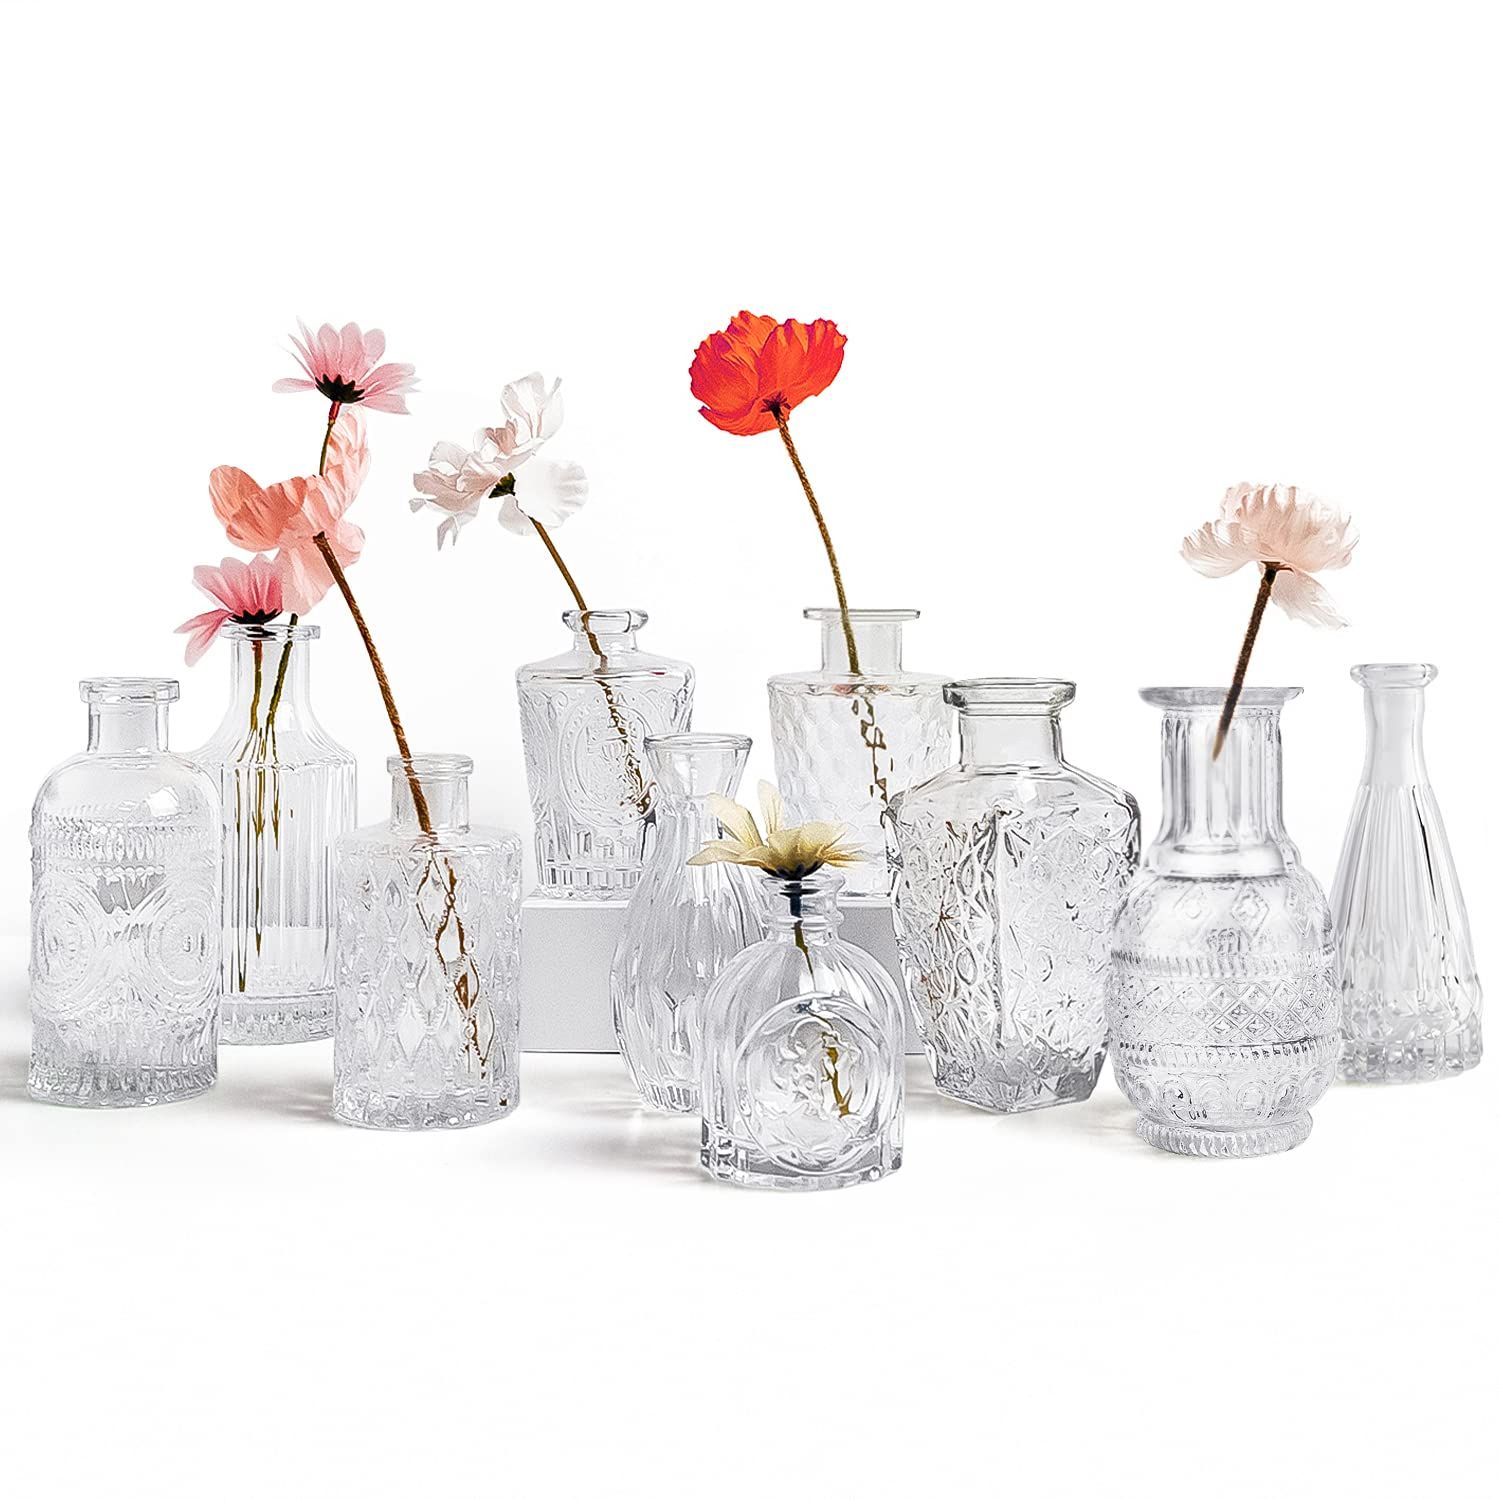 Glass Bud Vase Set of 10, Vases in Bulk, Small for Flowers, Centerpieces, Cute Vintage Rustic Wedding Decor, Home Table Flower Decoration | Amazon (US)